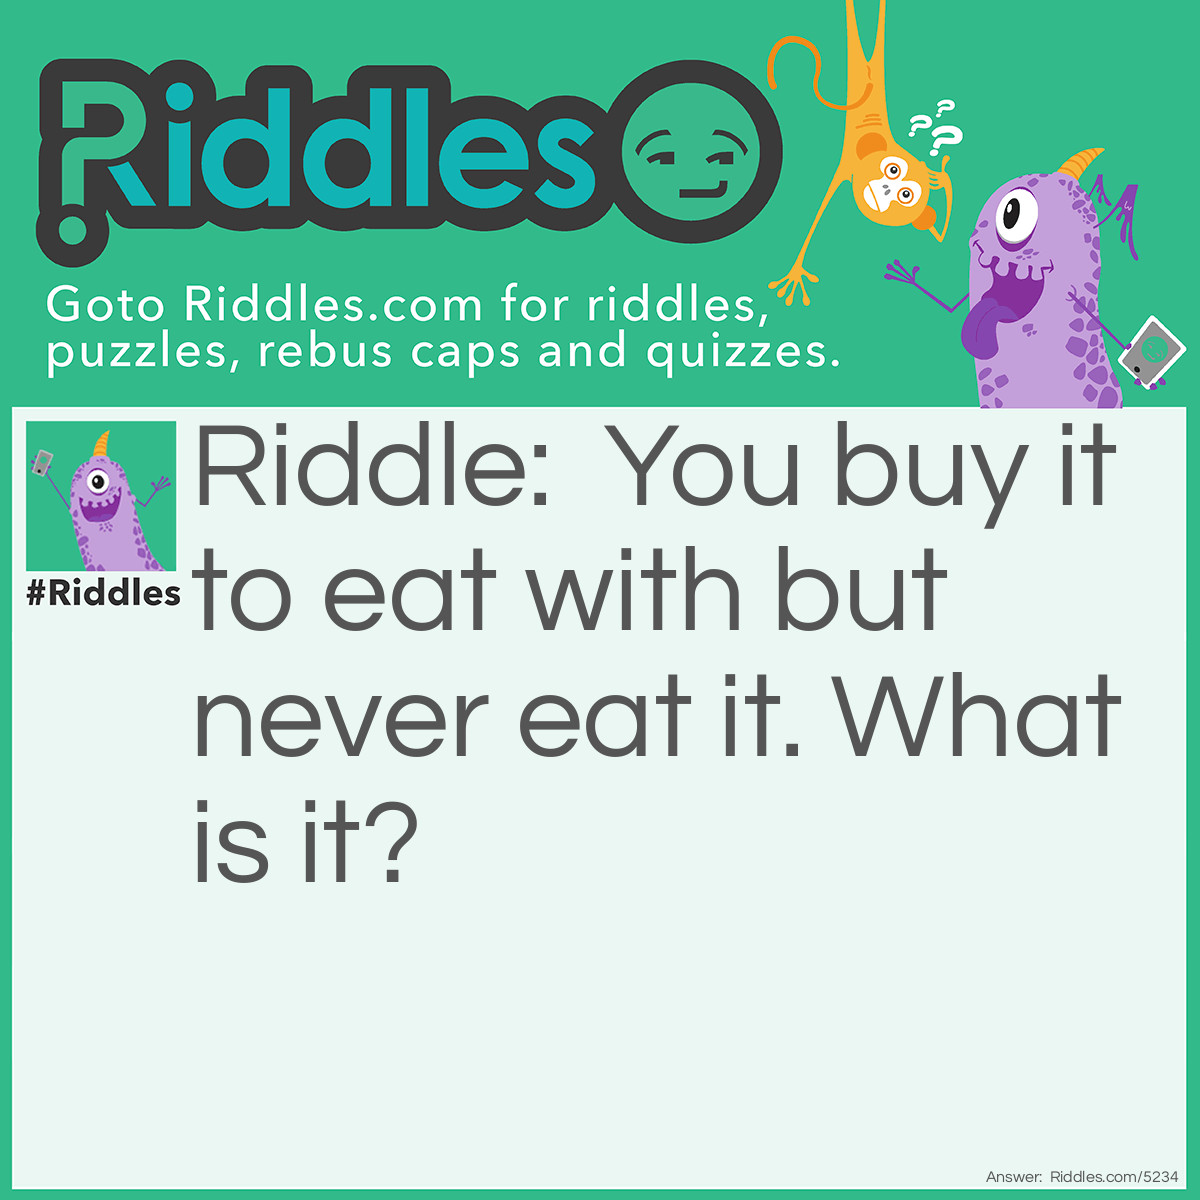 Riddle: You buy to eat with,  but never eat me.  What am I? Answer: A plate.